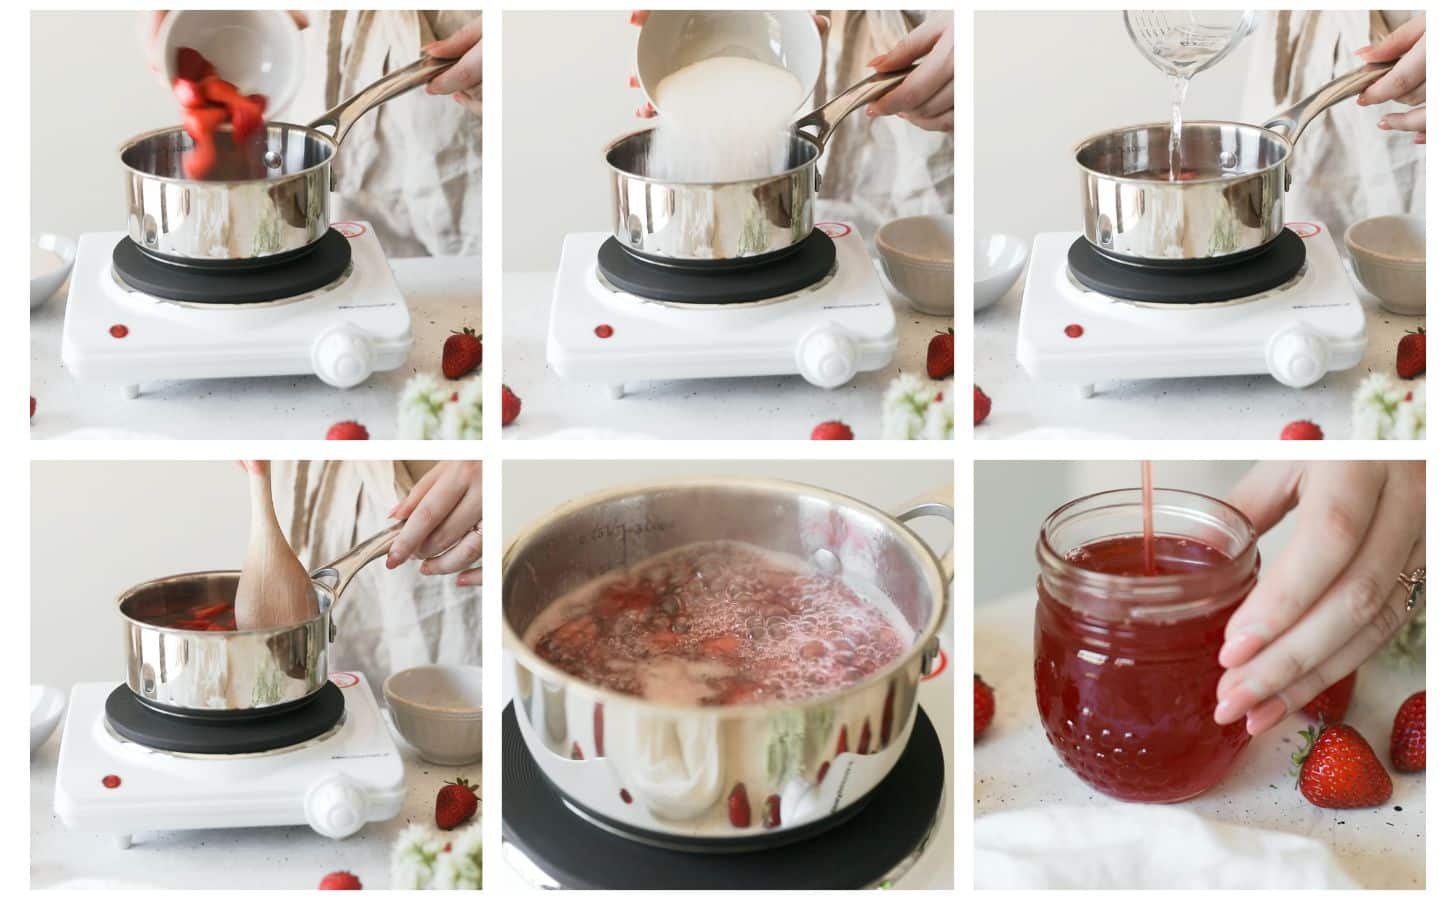 Six images making strawberry simple syrup. In photo 1, a woman's hands pour strawberries into a pot on a white counter next to strawberries and white flowers. In photo 2, the hands pour sugar into the pot. In photo 3, the hands pour water into the pot. In photo 4, the woman is stirring the syrup. In photo 5, the syrup is boiling. In photo 6, the woman is pouring the syrup into a jar.